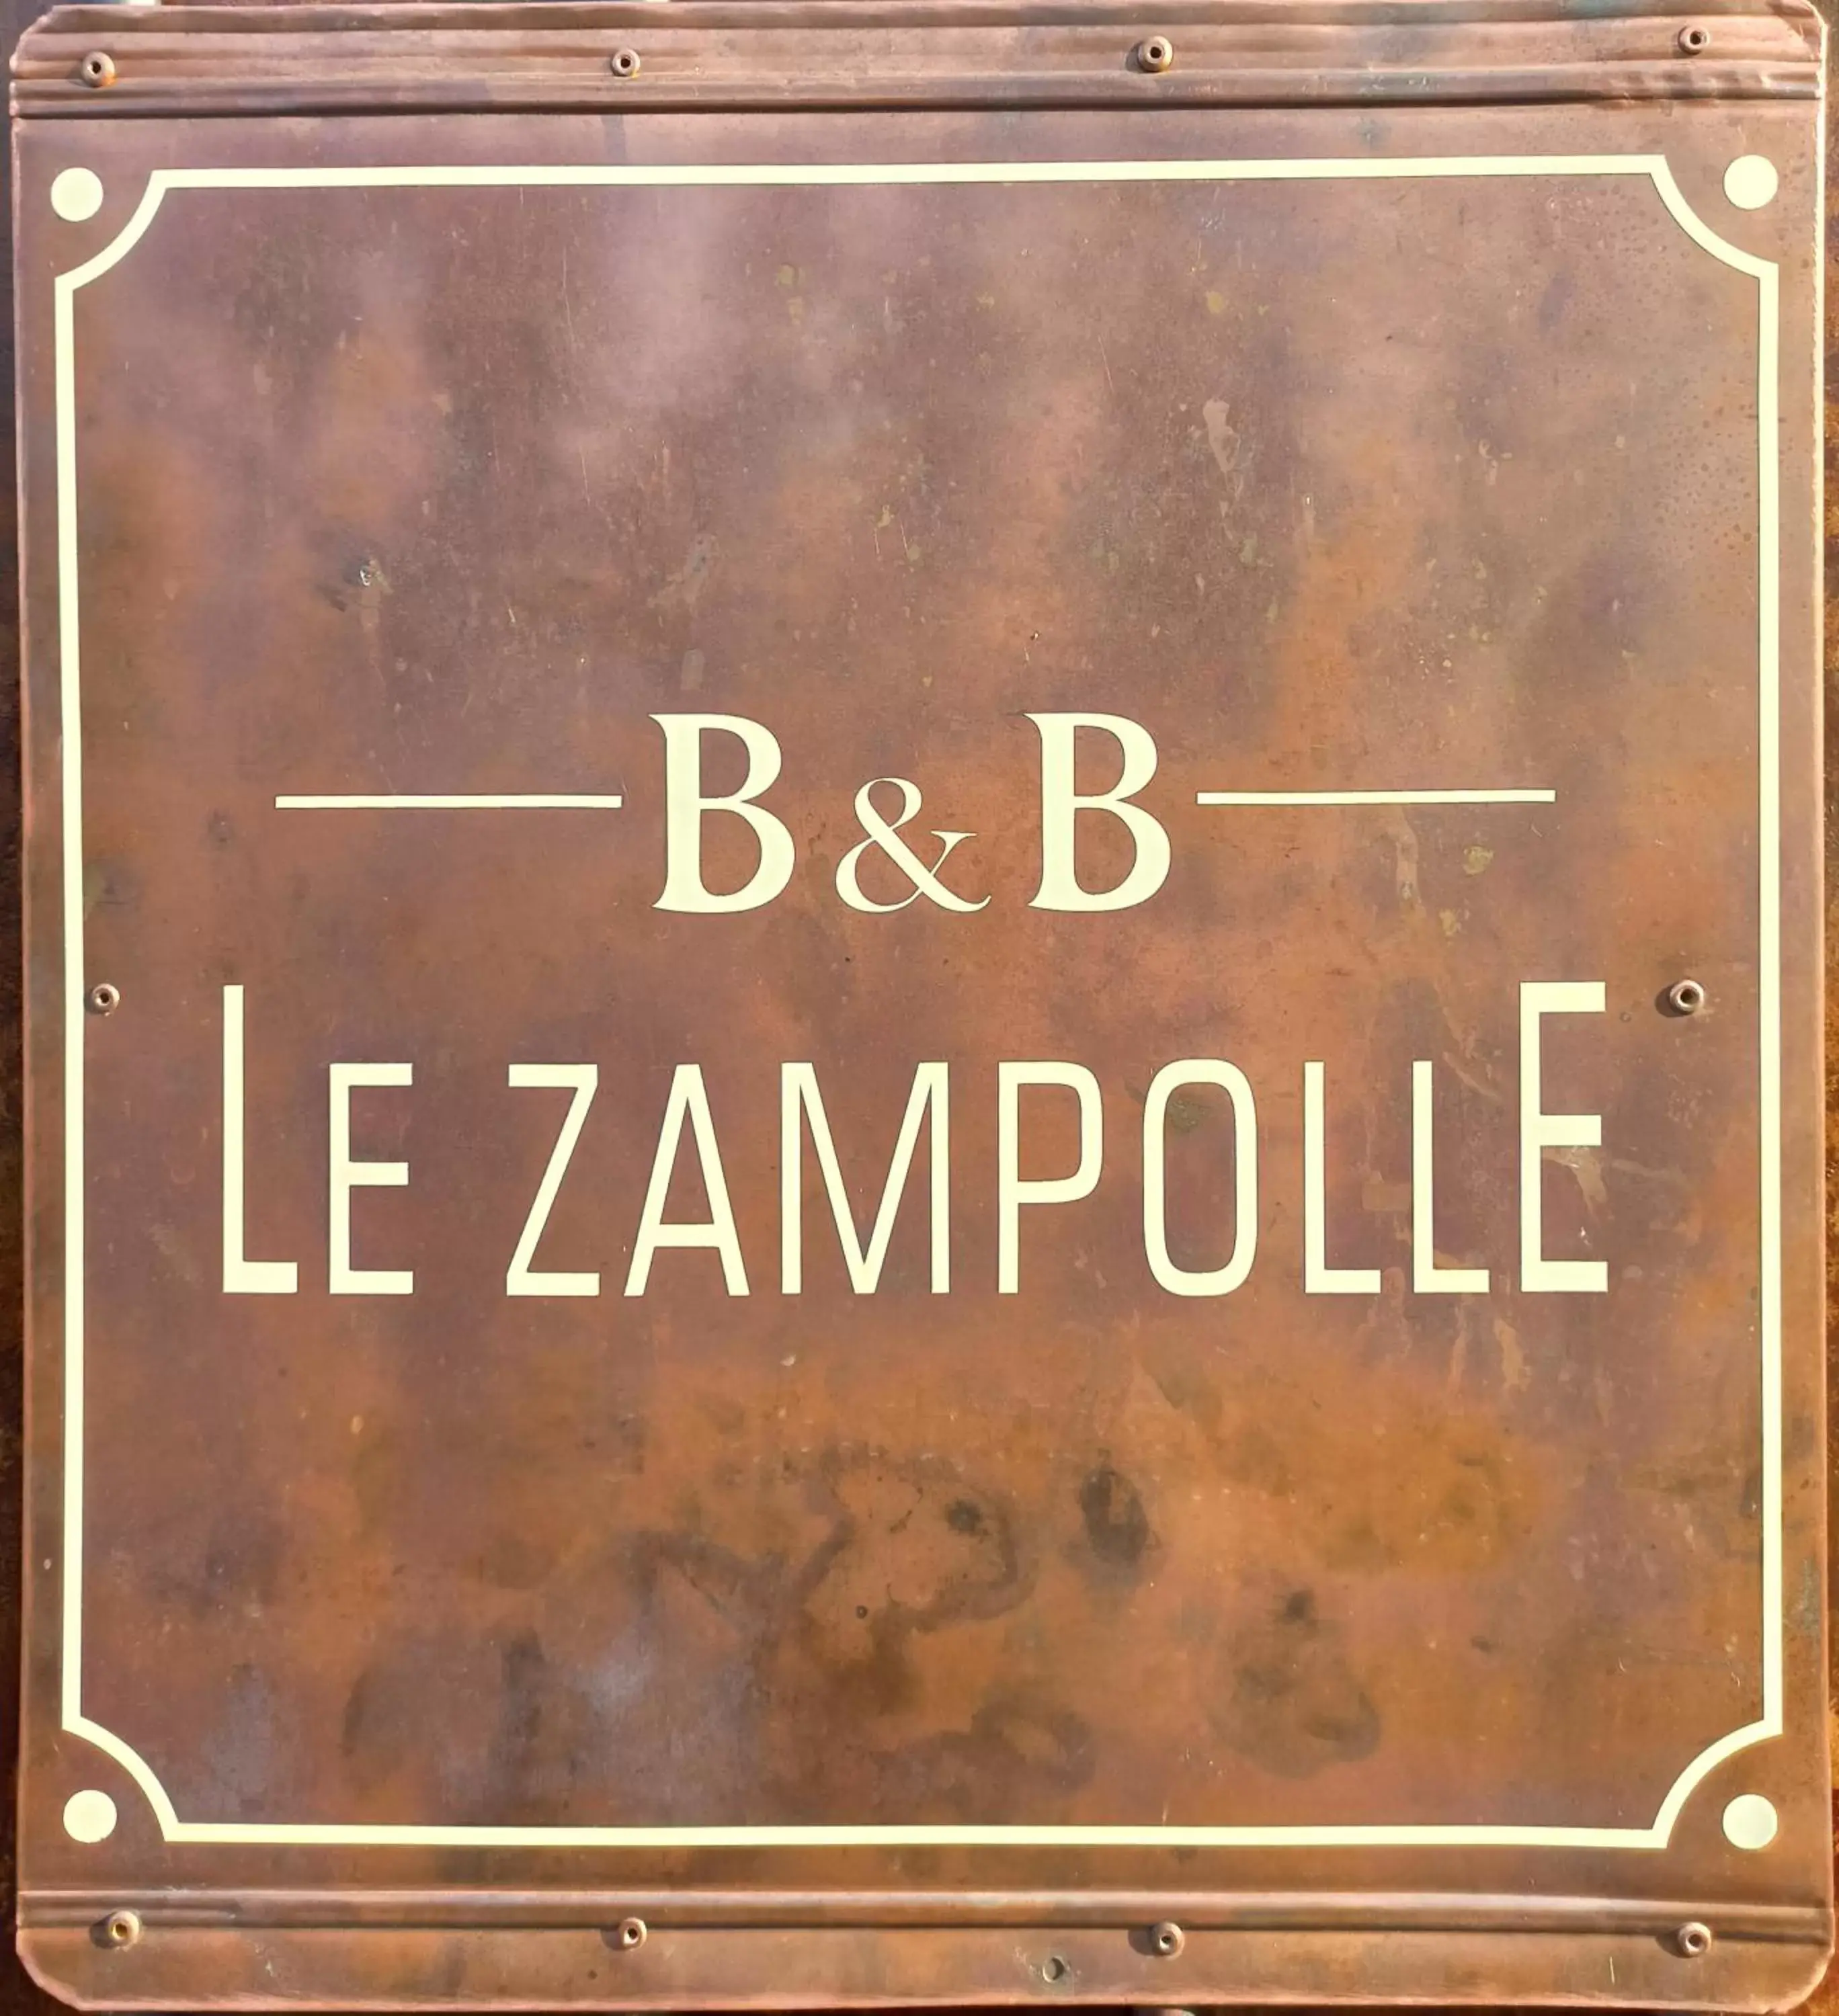 Property logo or sign in Le Zampolle B & B